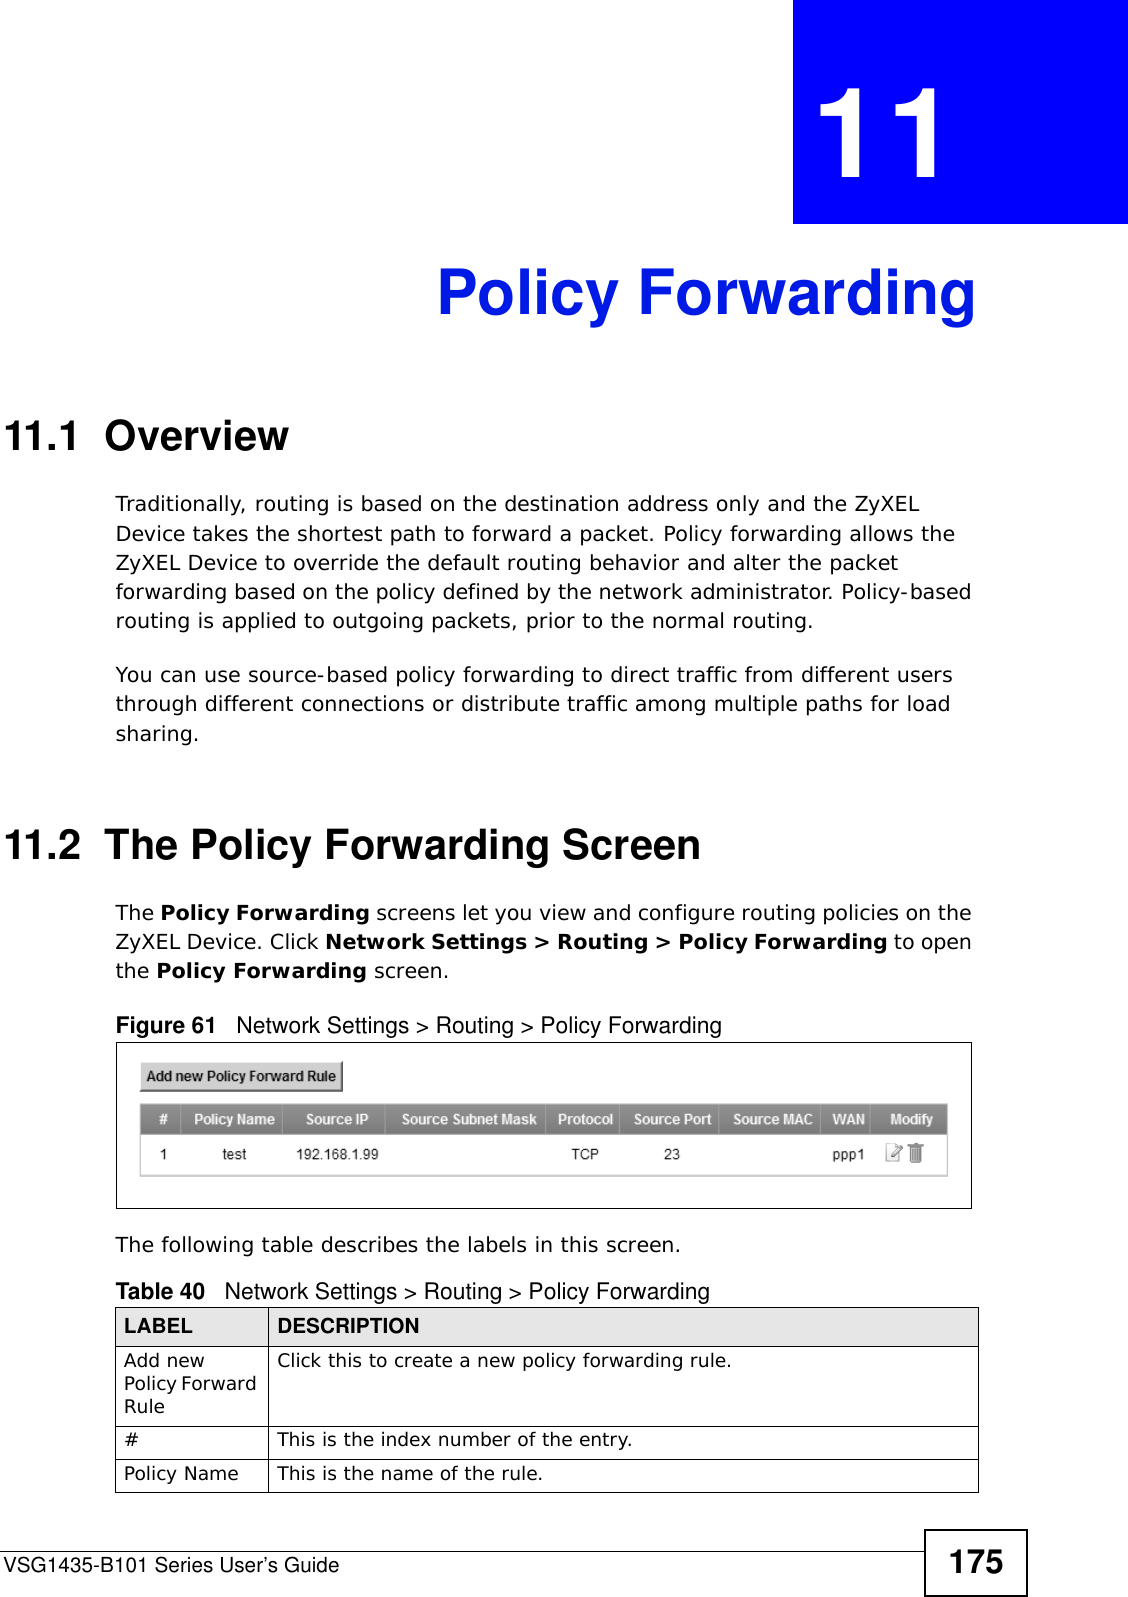 VSG1435-B101 Series User’s Guide 175CHAPTER  11 Policy Forwarding11.1  Overview   Traditionally, routing is based on the destination address only and the ZyXEL Device takes the shortest path to forward a packet. Policy forwarding allows the ZyXEL Device to override the default routing behavior and alter the packet forwarding based on the policy defined by the network administrator. Policy-based routing is applied to outgoing packets, prior to the normal routing.You can use source-based policy forwarding to direct traffic from different users through different connections or distribute traffic among multiple paths for load sharing.11.2  The Policy Forwarding ScreenThe Policy Forwarding screens let you view and configure routing policies on the ZyXEL Device. Click Network Settings &gt; Routing &gt; Policy Forwarding to open the Policy Forwarding screen. Figure 61   Network Settings &gt; Routing &gt; Policy ForwardingThe following table describes the labels in this screen. Table 40   Network Settings &gt; Routing &gt; Policy ForwardingLABEL DESCRIPTIONAdd new Policy Forward RuleClick this to create a new policy forwarding rule.#This is the index number of the entry.Policy Name This is the name of the rule.